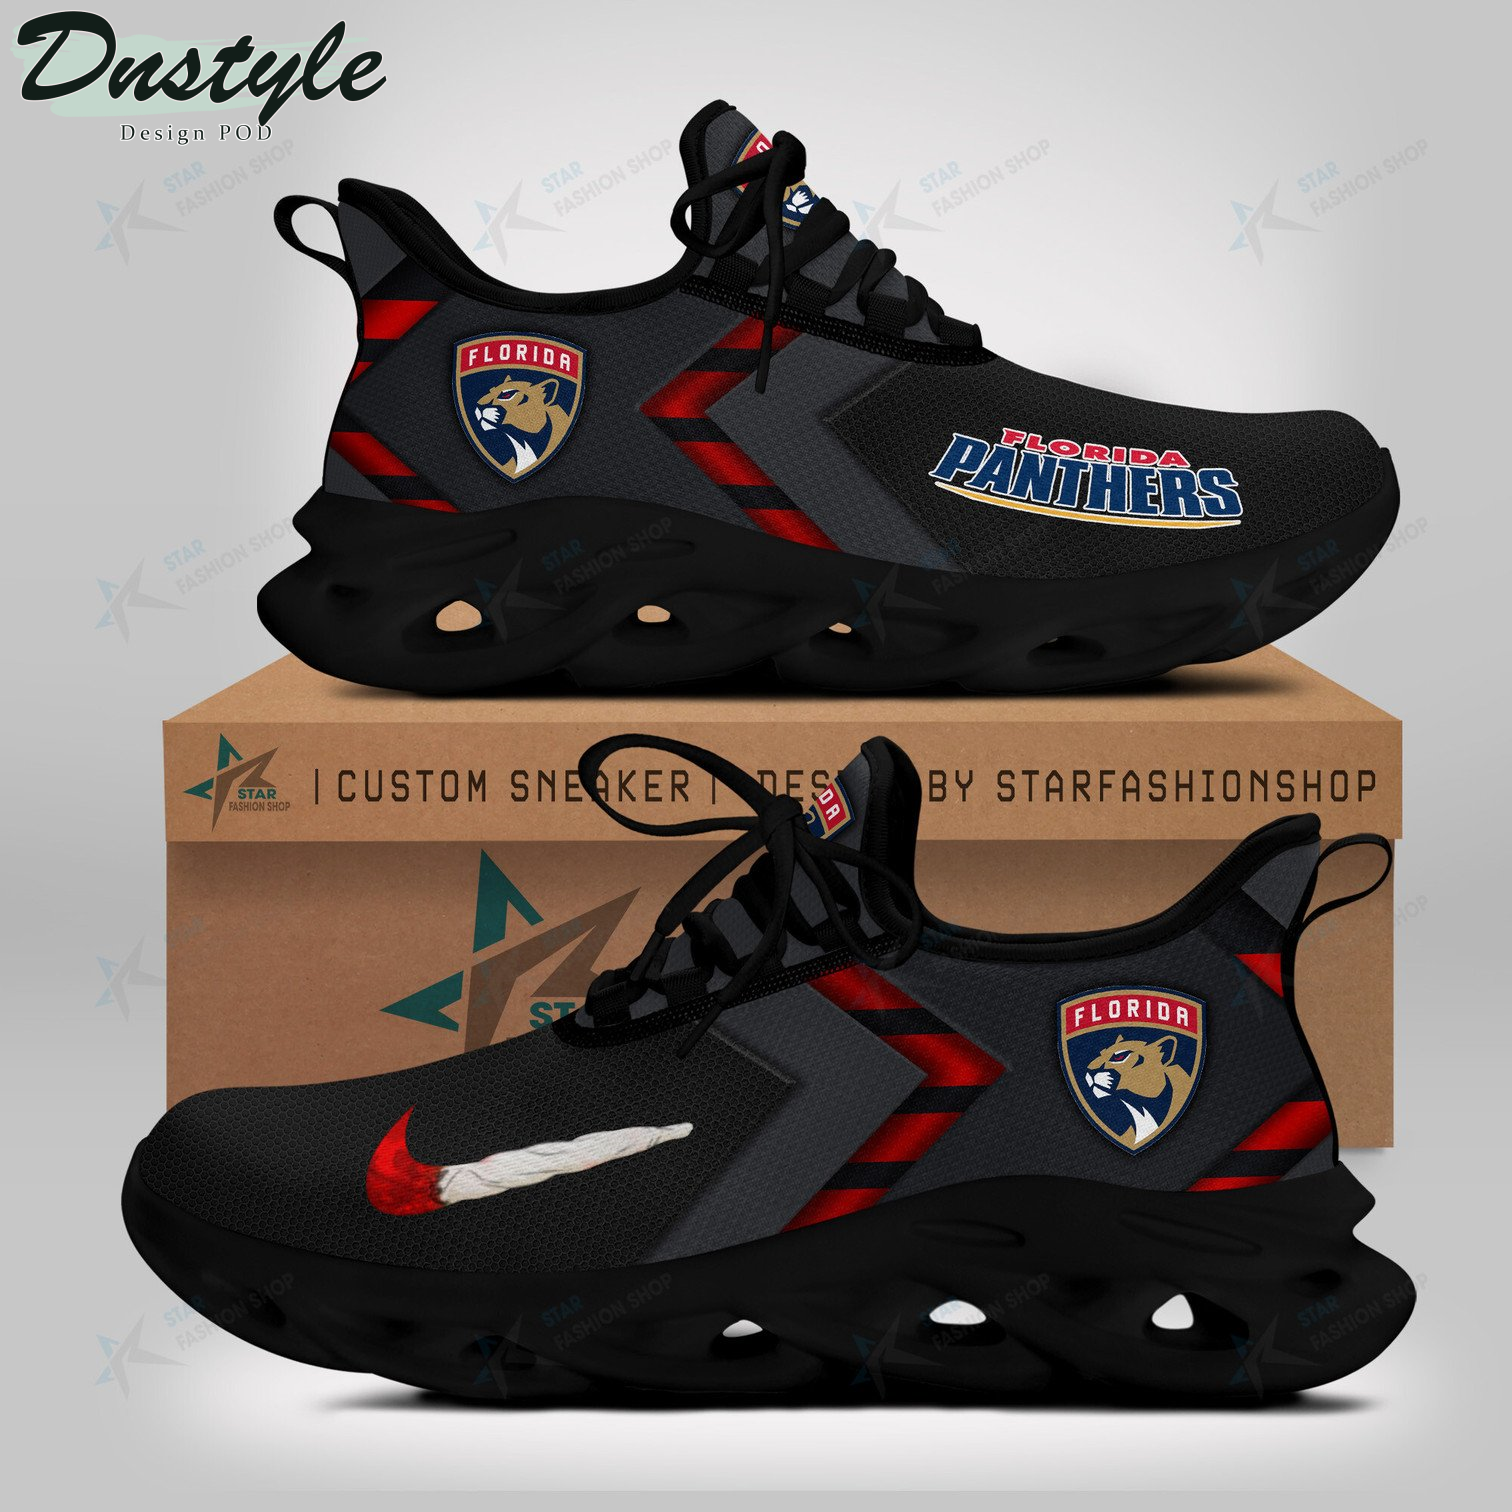 Florida Panthers max soul shoes